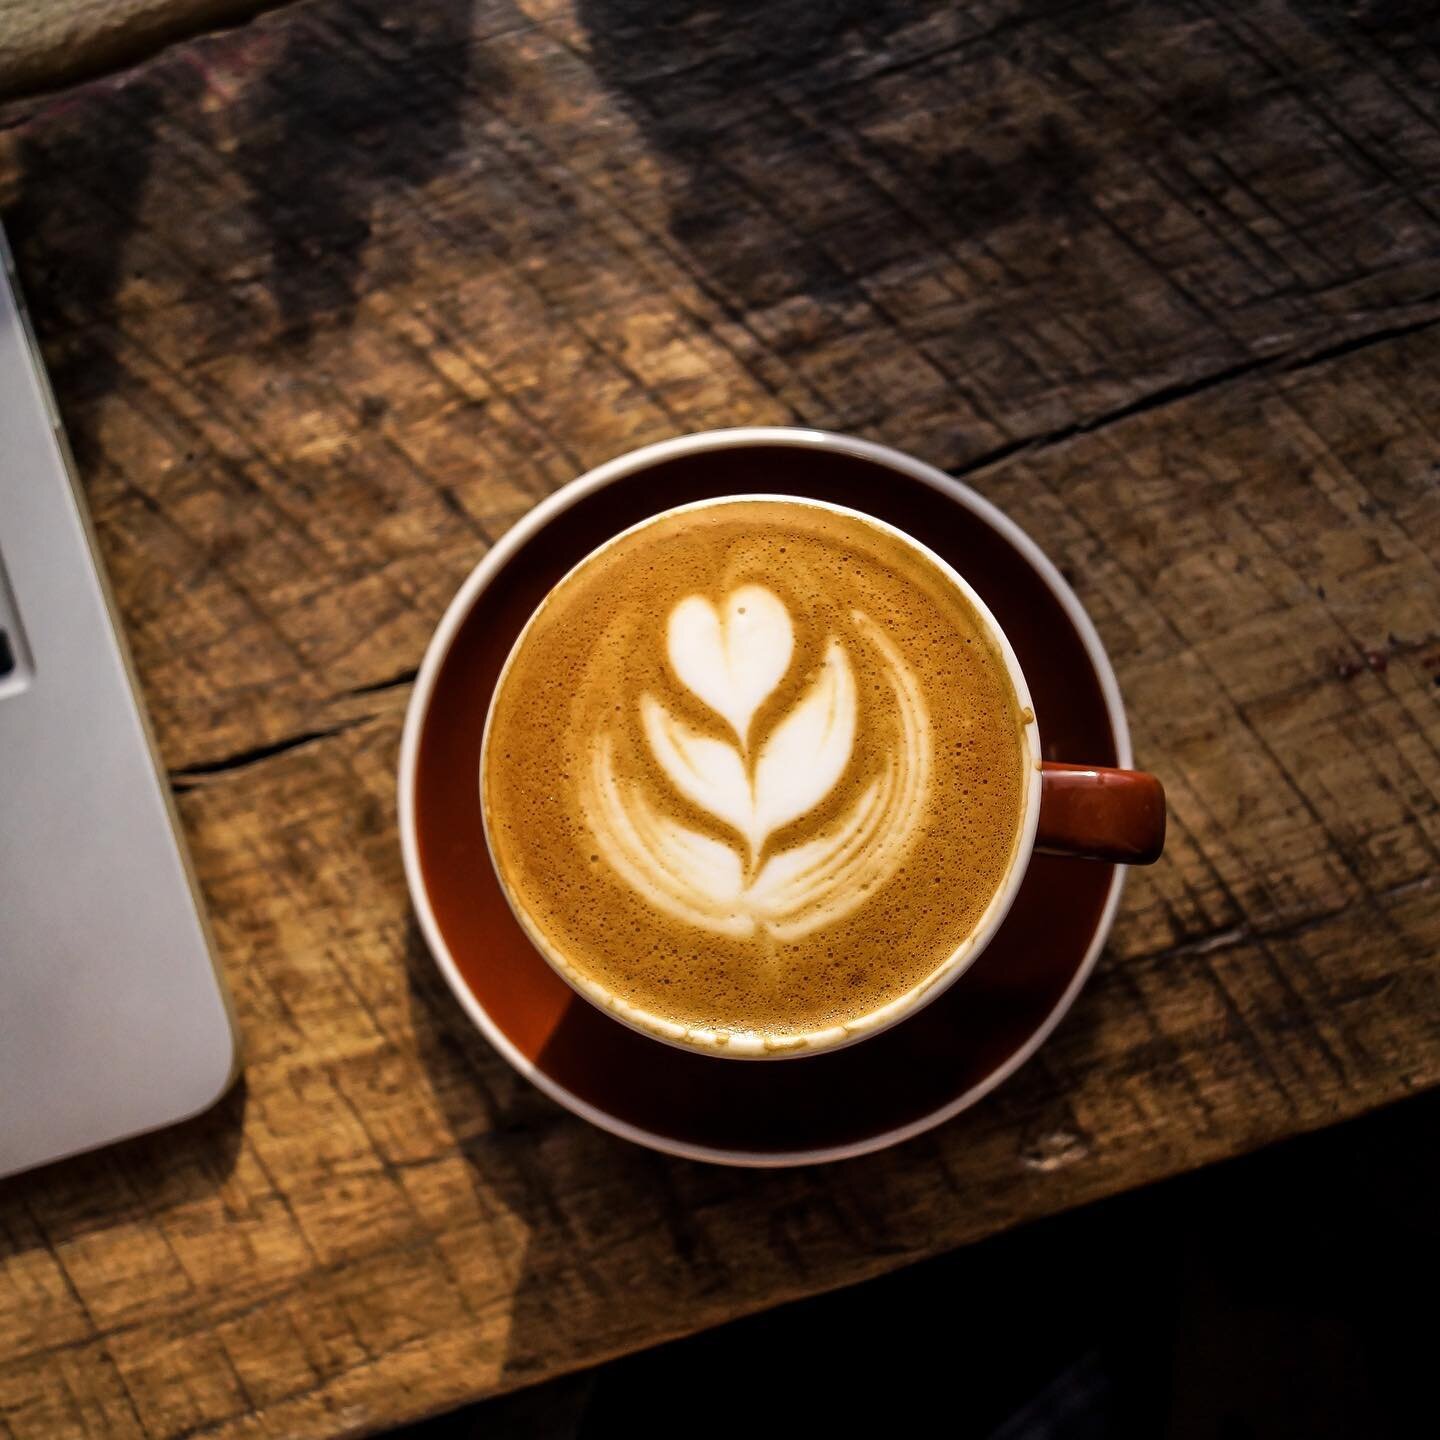 When you look closely, is your latte art telling you to quit your job? ☕️

If so, do these 5 things first&hellip;

1) Have a financial plan of action

2) Document your accomplishments while they&rsquo;re fresh in your mind 

3) Save your work samples